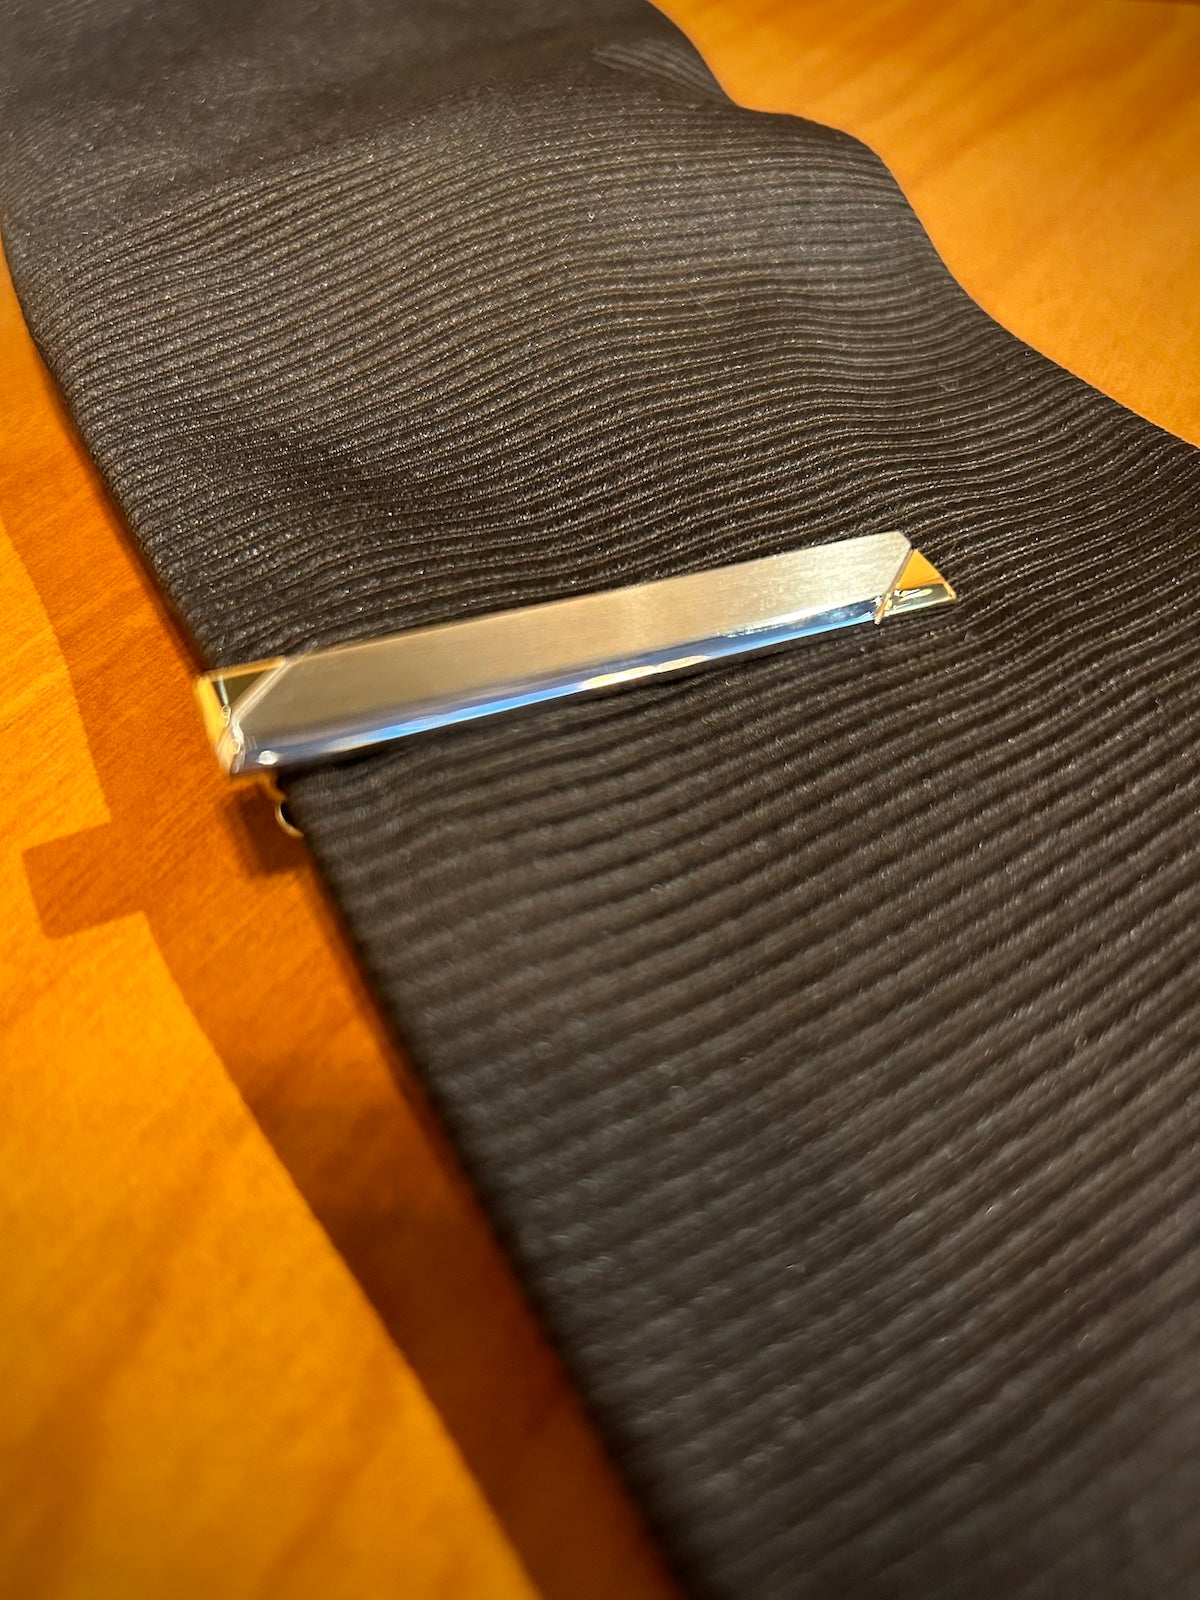 Stainless Steel & Polished Gold Diagonal Edge Tie Bar